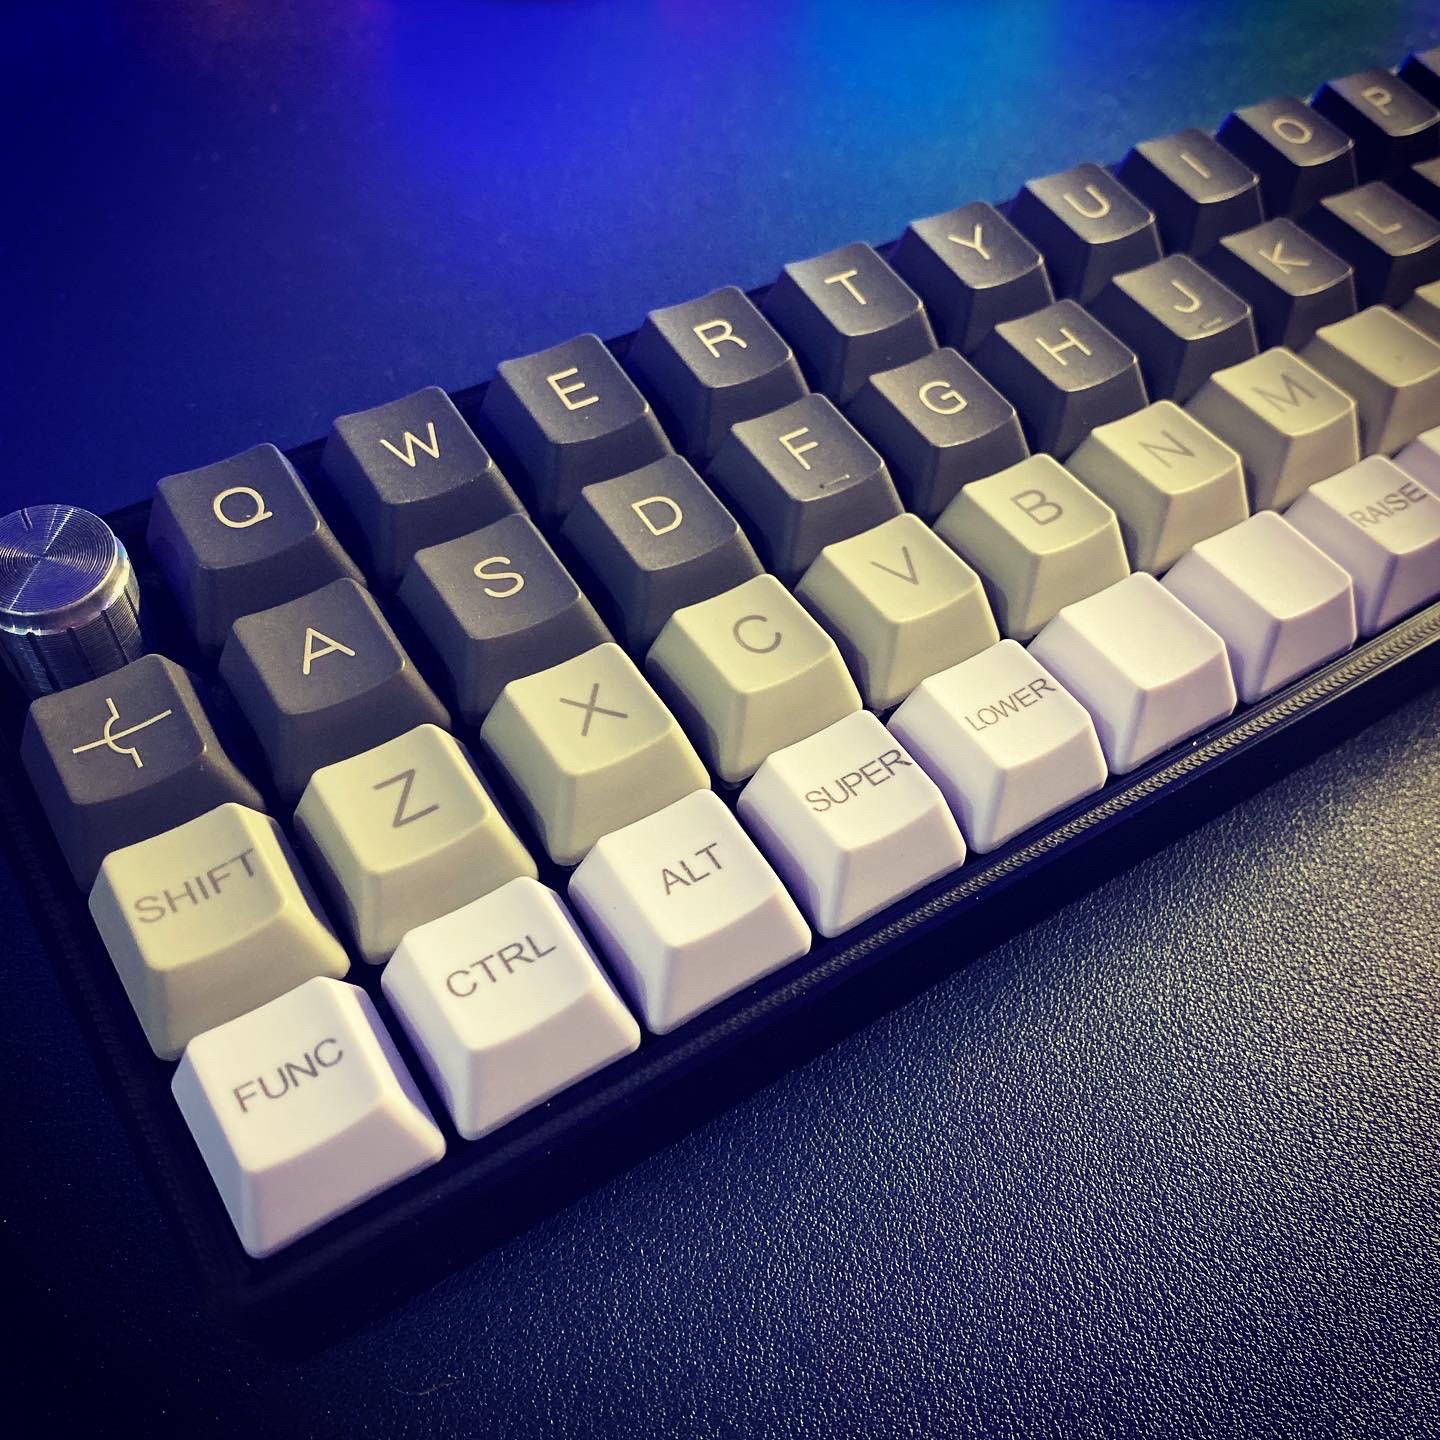 3D Printed Hand Wired 40 Keyboard Blake Drayson